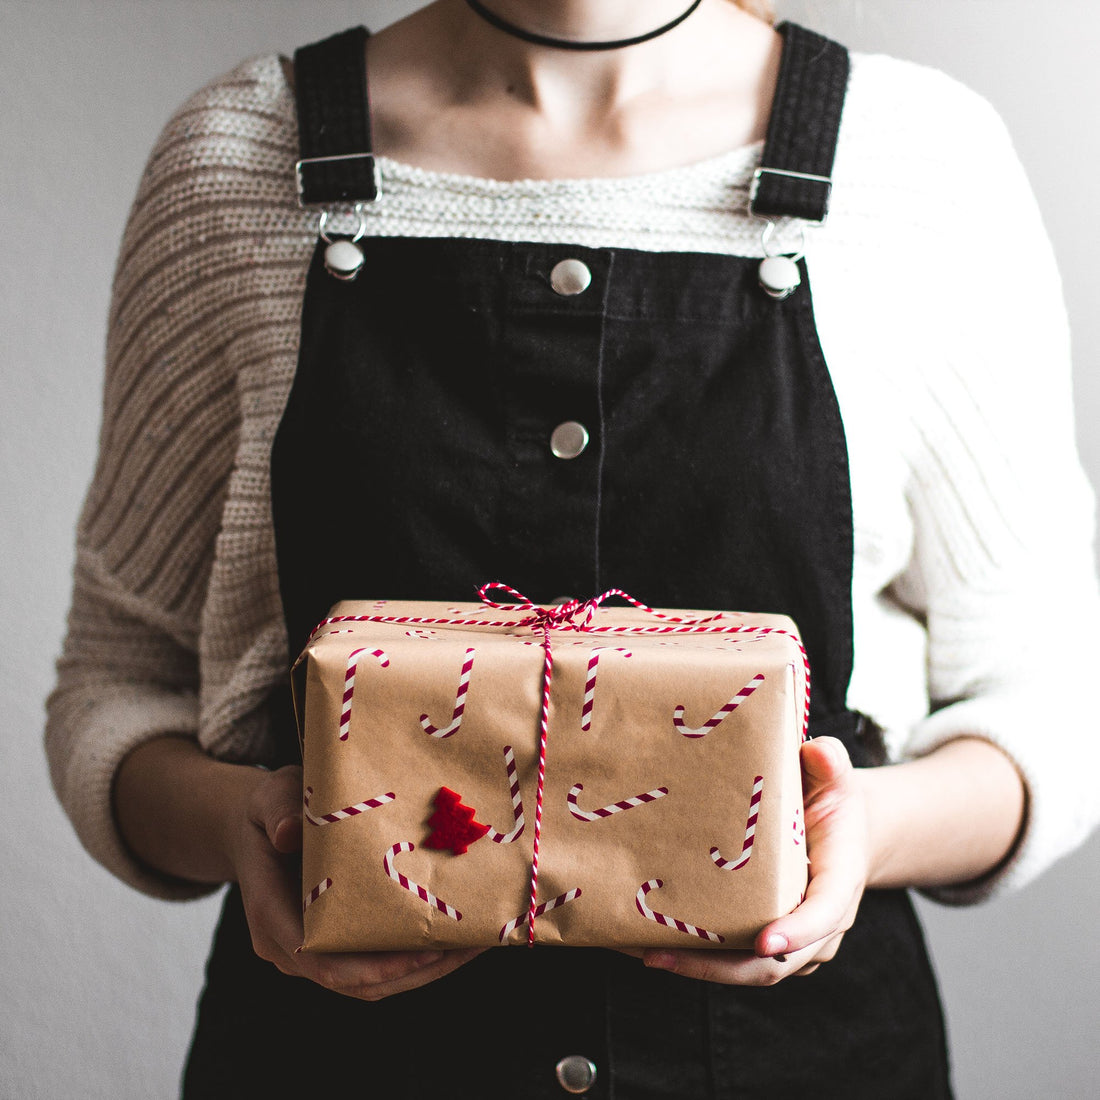 Sustainable gift ideas for Christmas